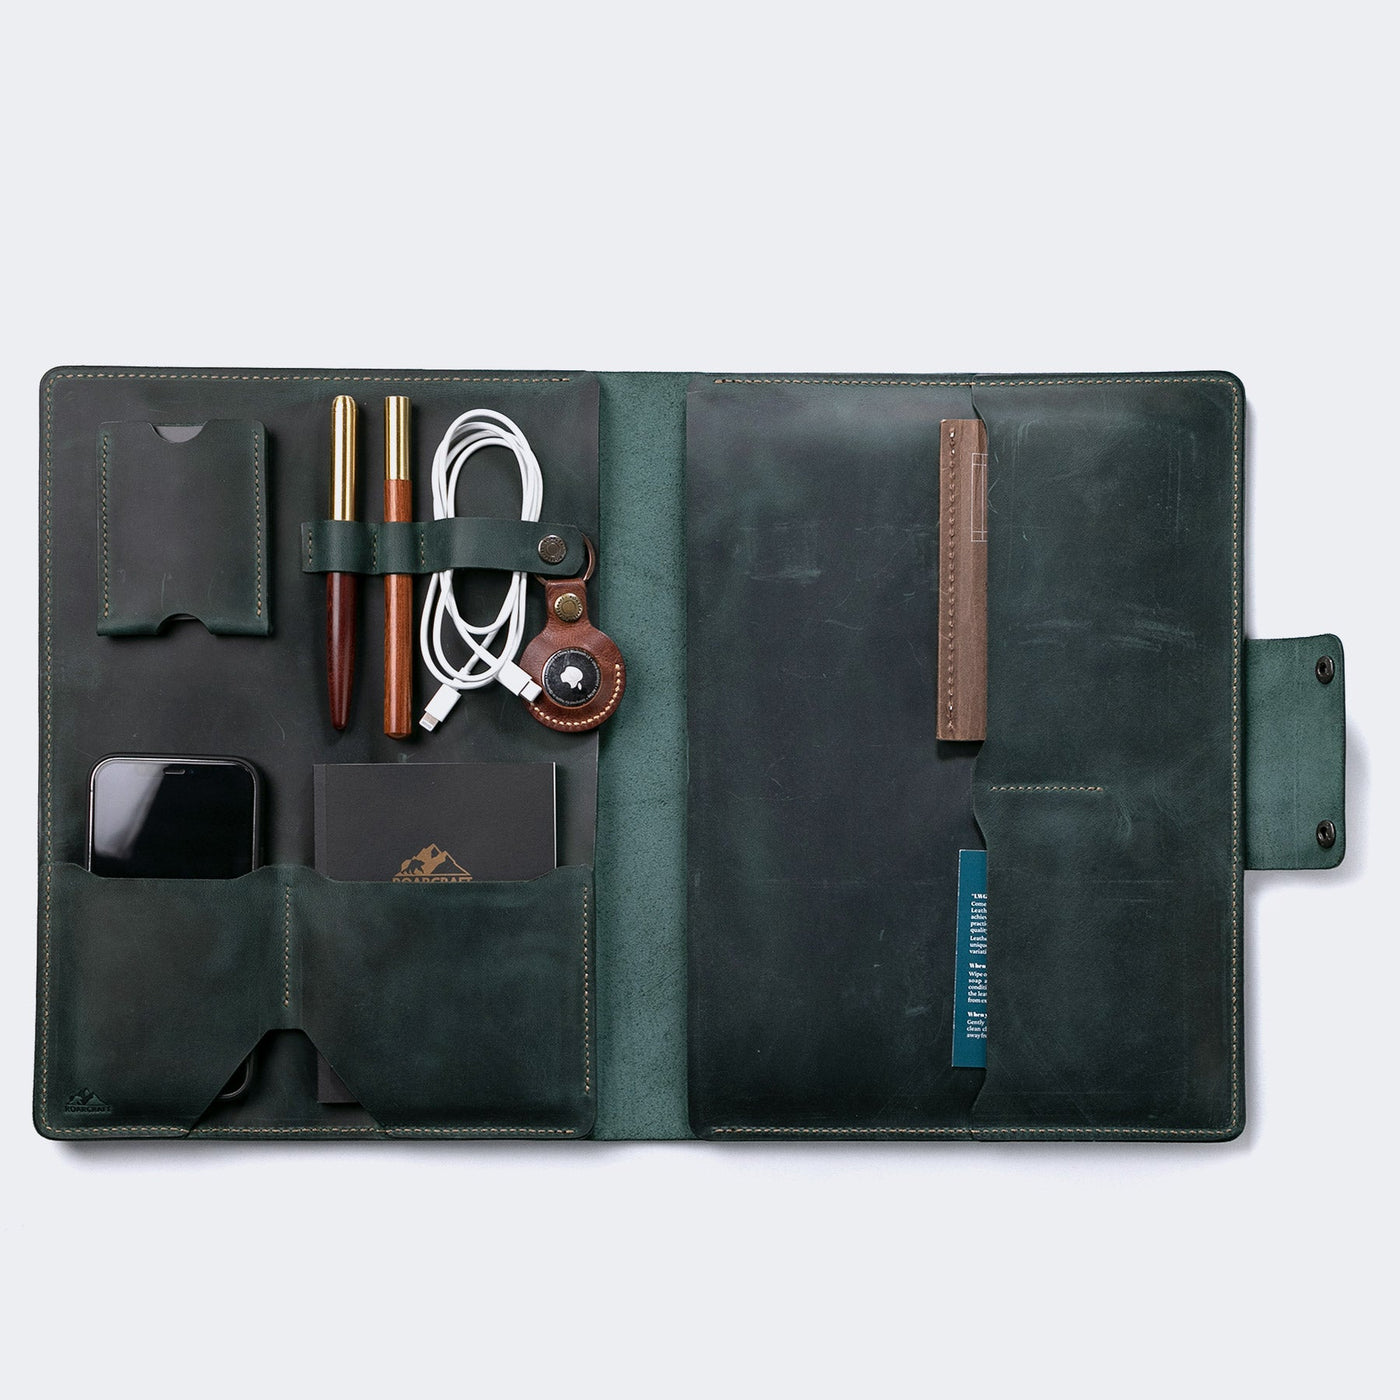 Full grain leather remarkable 2 case with pen holder – DMleather